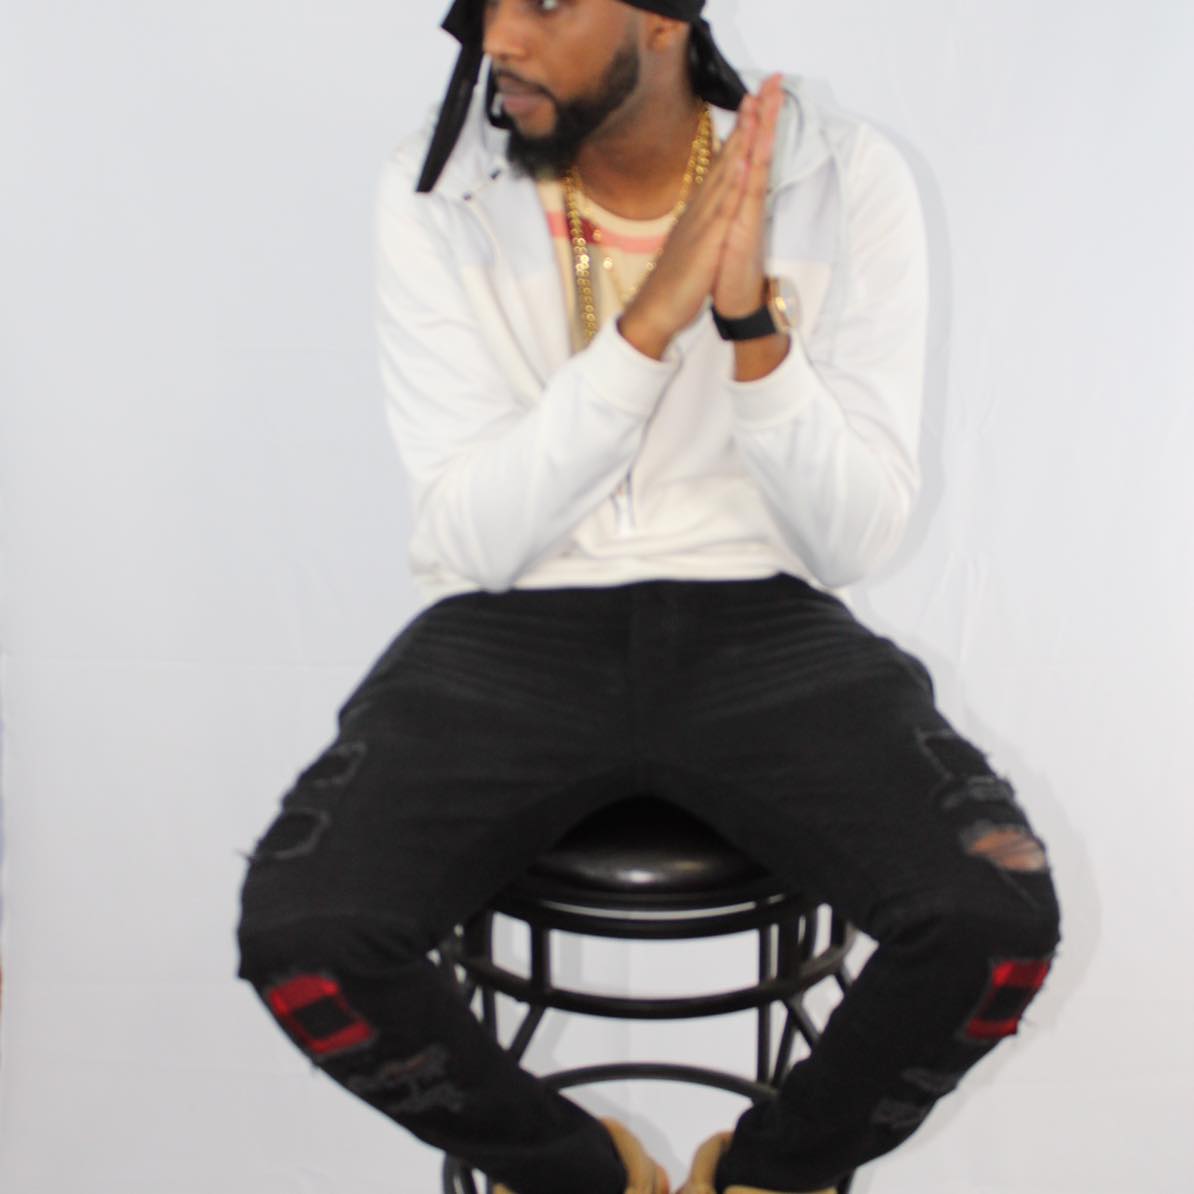 Yonis Bryant the rapper on a photo shoot